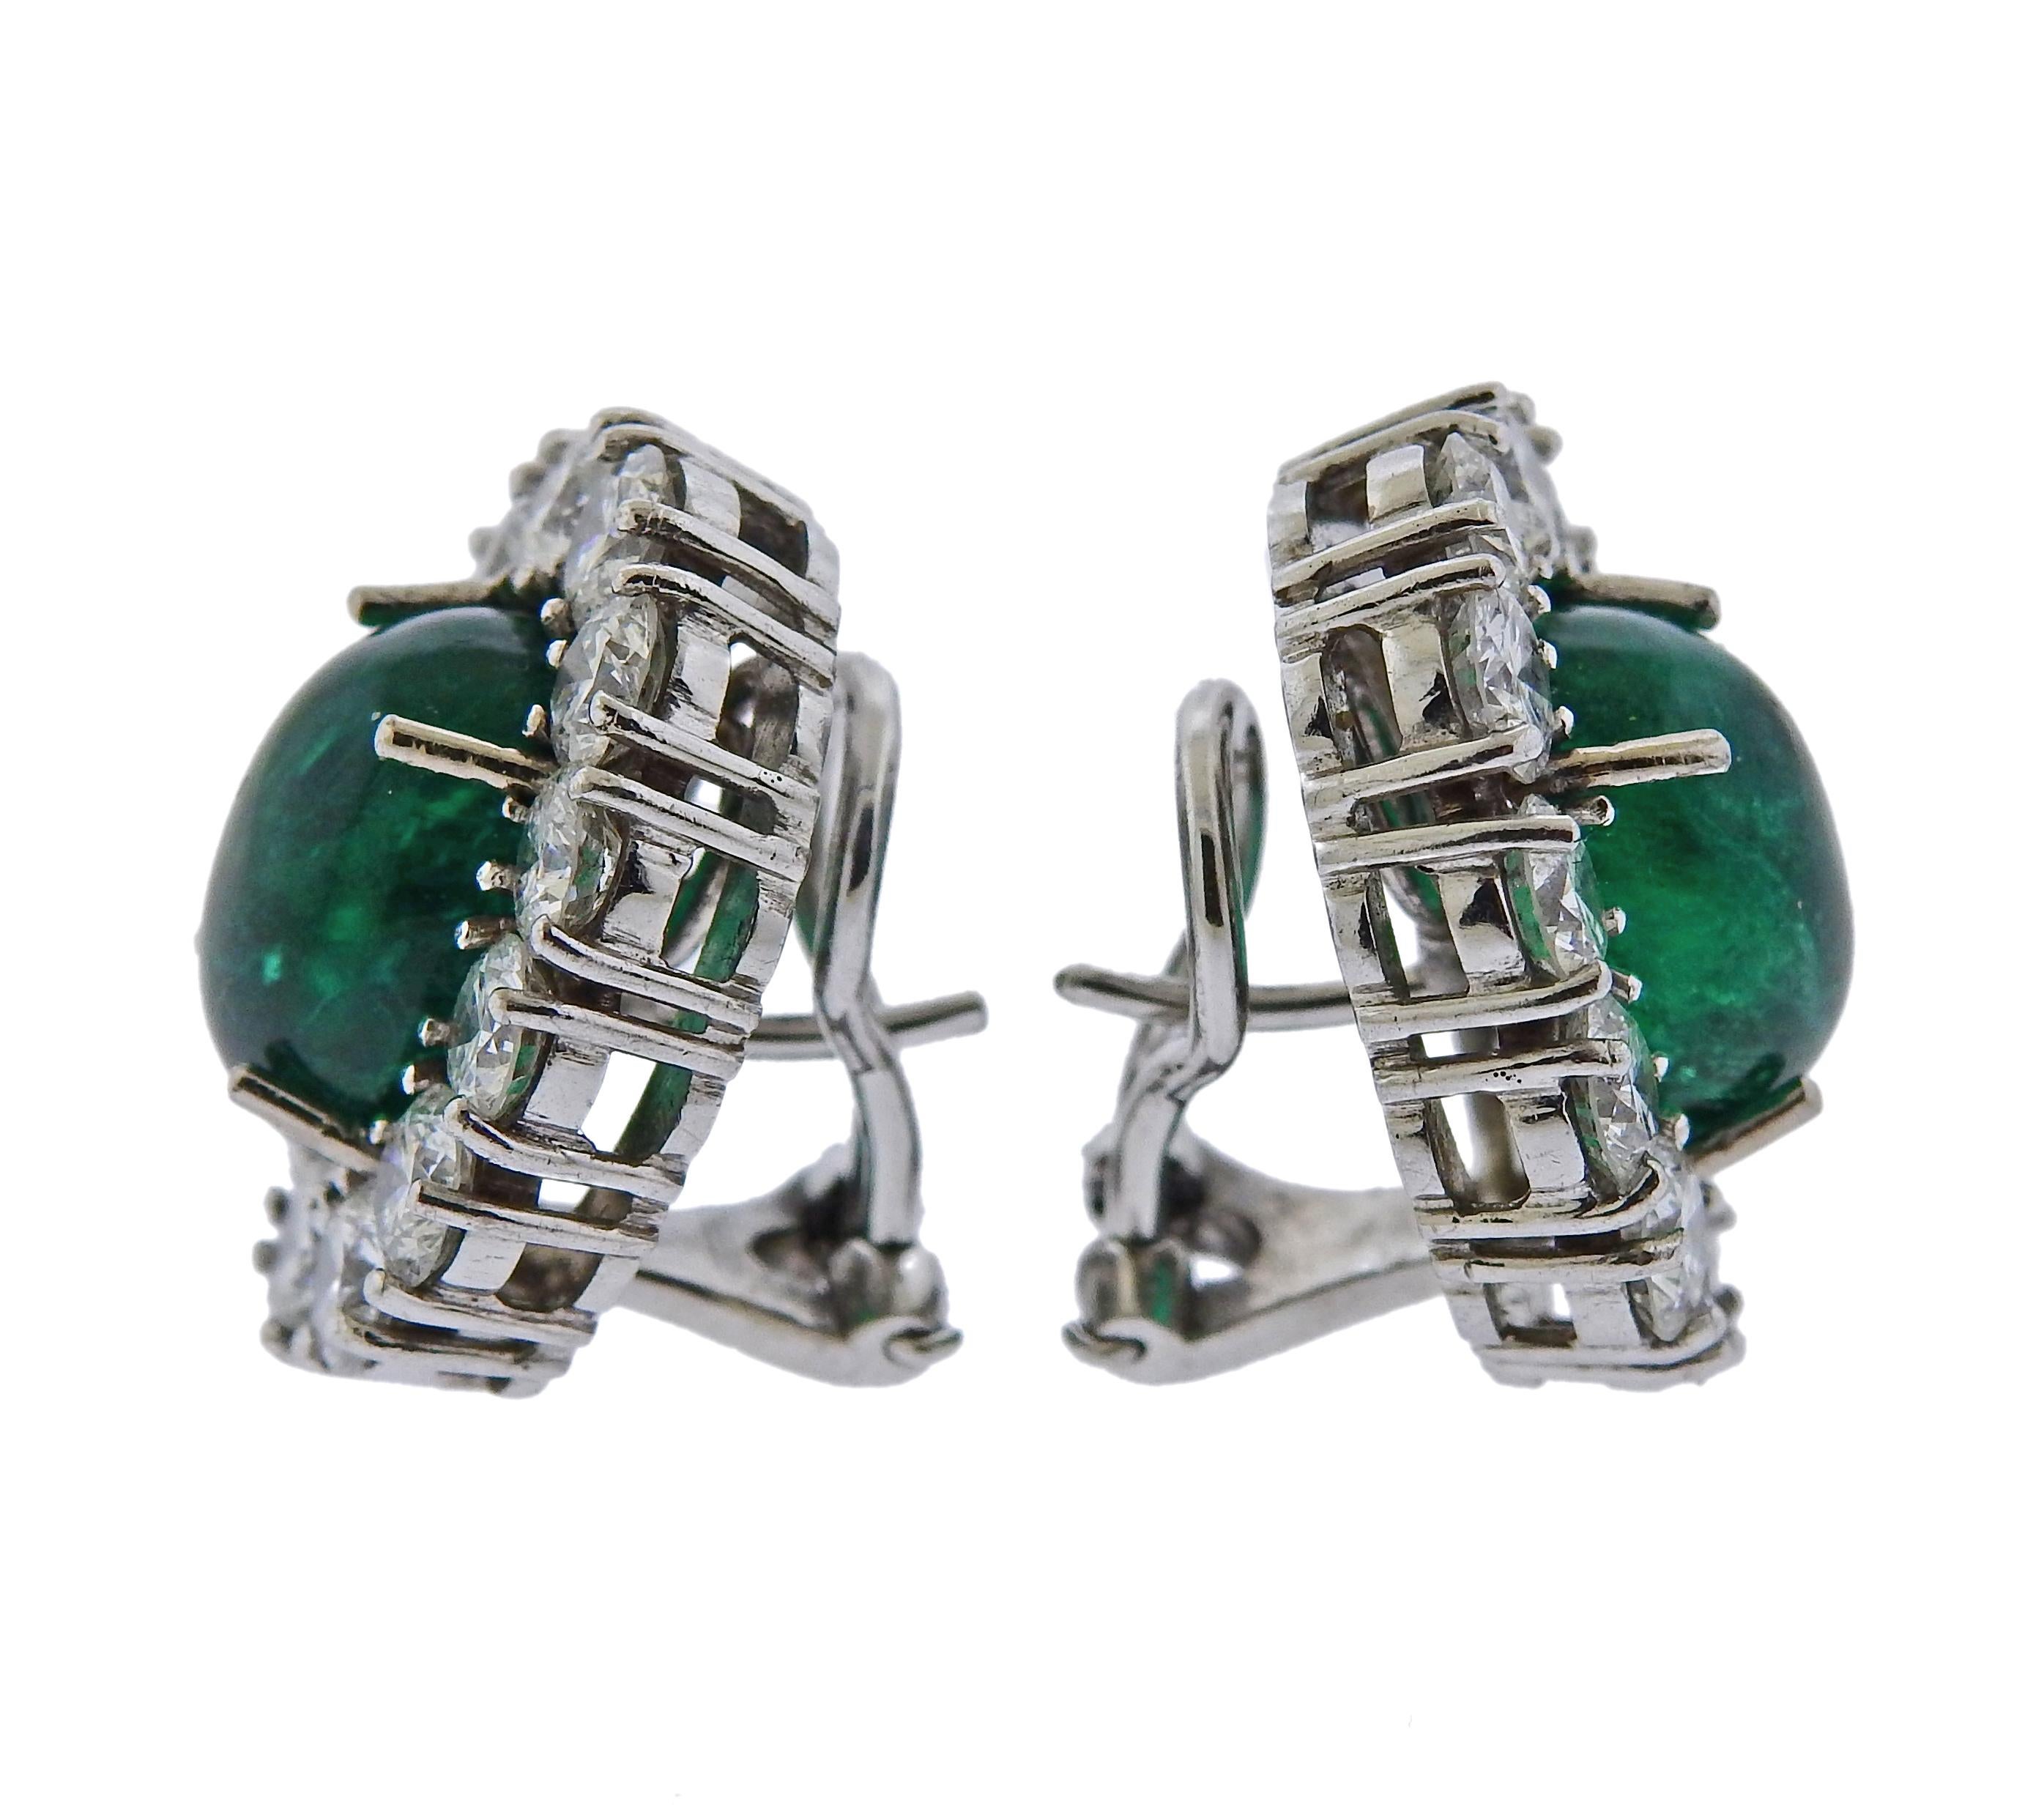 Pair of 18k white gold cocktail earrings, set each with an approx. 5 carats oval emerald cabochon, measuring 12.1mm x 9.7mm x 6.7mm, surrounded with a total of approx. 4.40ctw in diamonds.  Earrings measure approx. 22mm x 18mm. Marked 750. Weigh